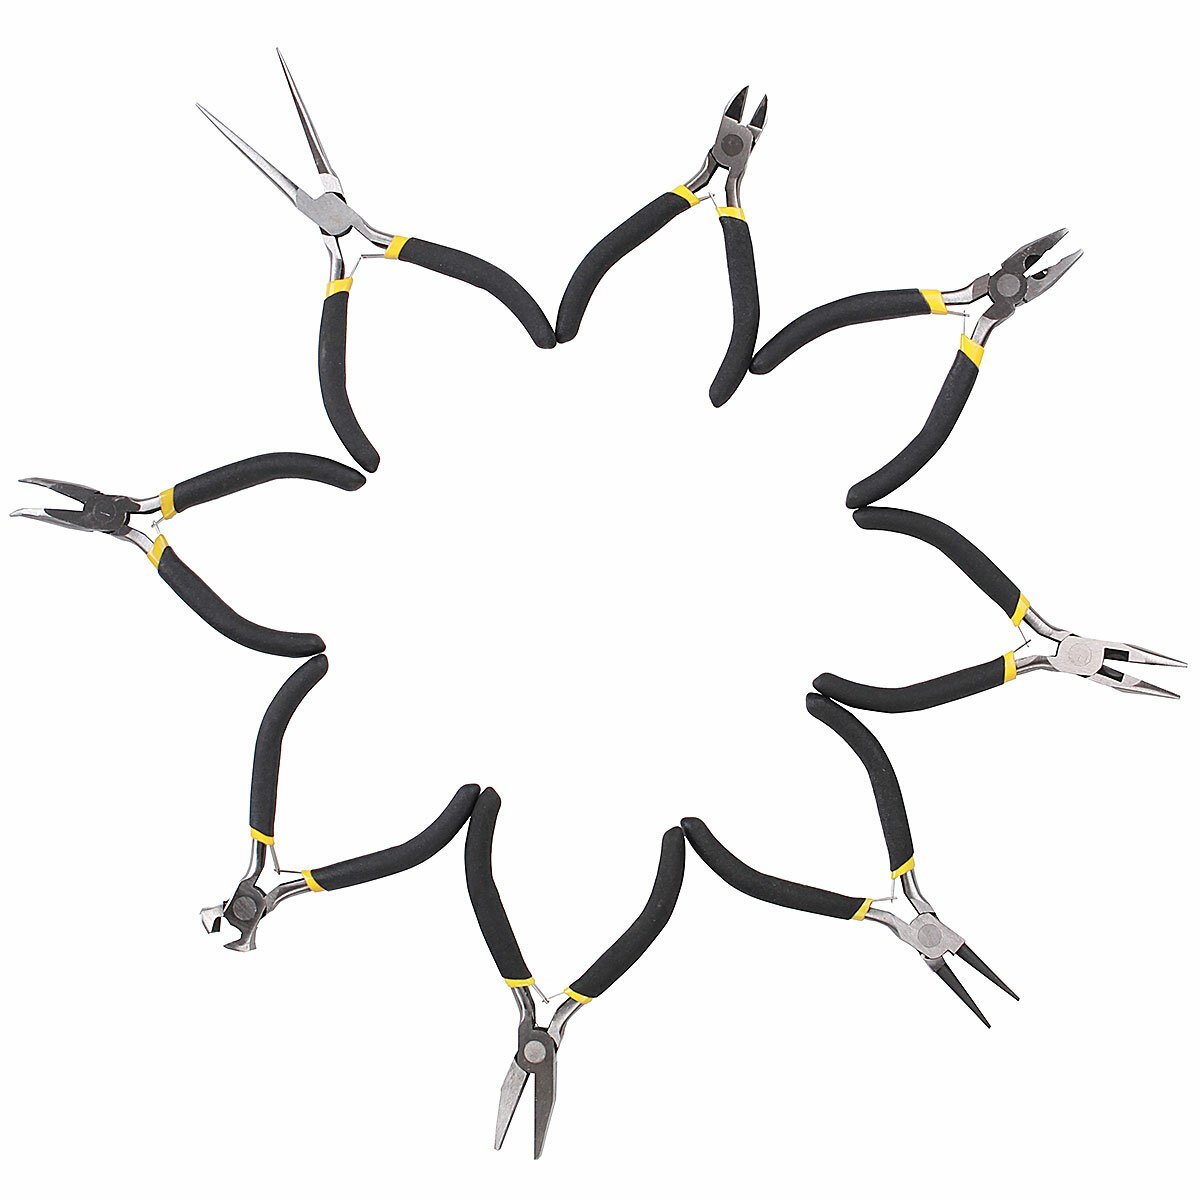 8pcs Mini Pliers / Wire Side Cutters Tool Set With Soft Grip Handles DIY Toolset